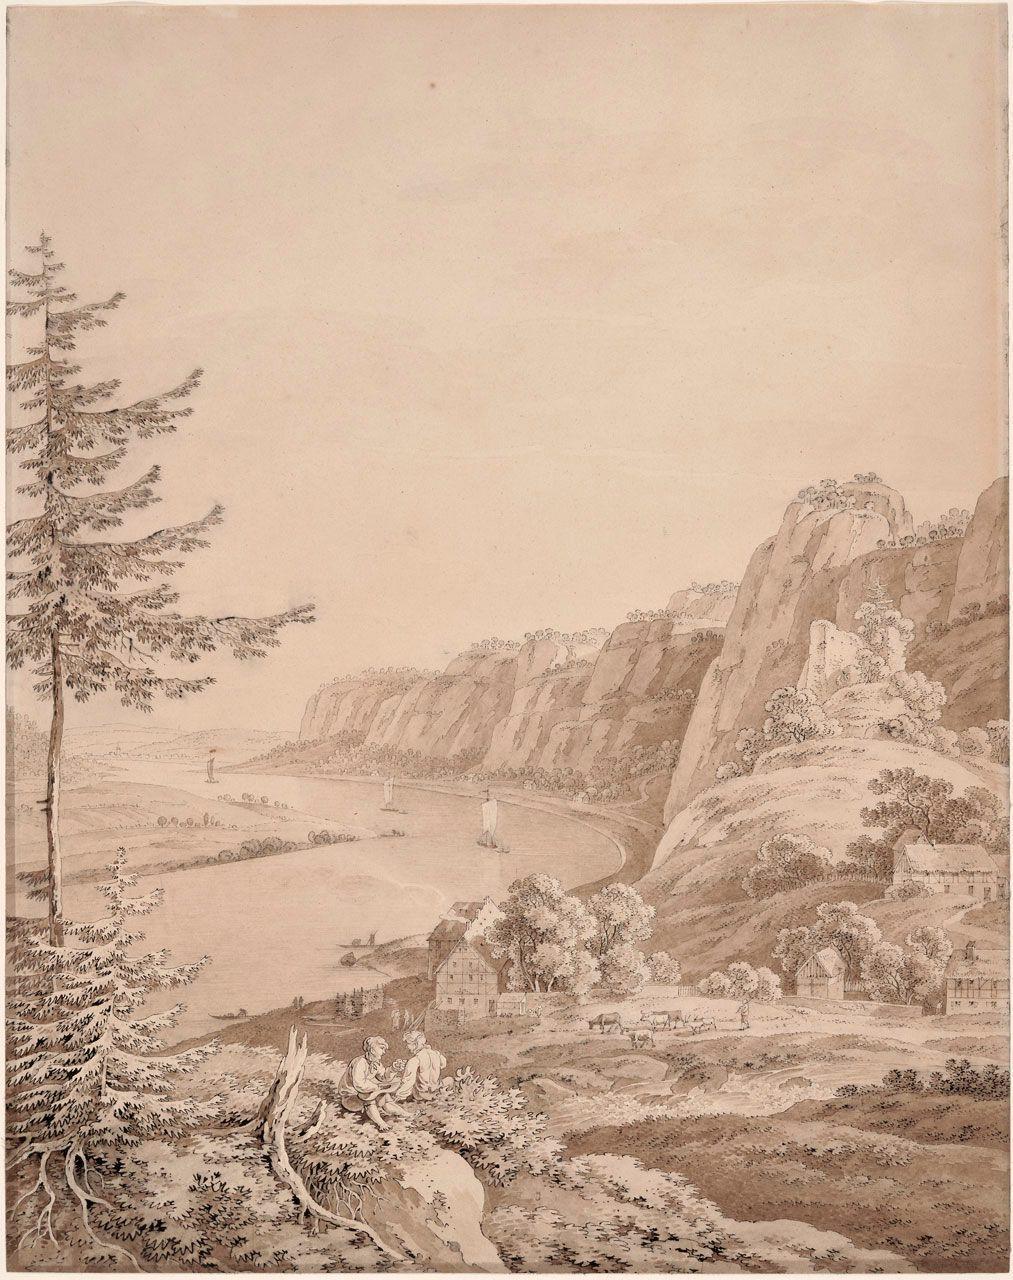 A View of the Elbe River and the Bastei Rocks in the Sächsische Schweiz, Saxony
Adrian  Zingg 
18th Century,19th Century
2006.12